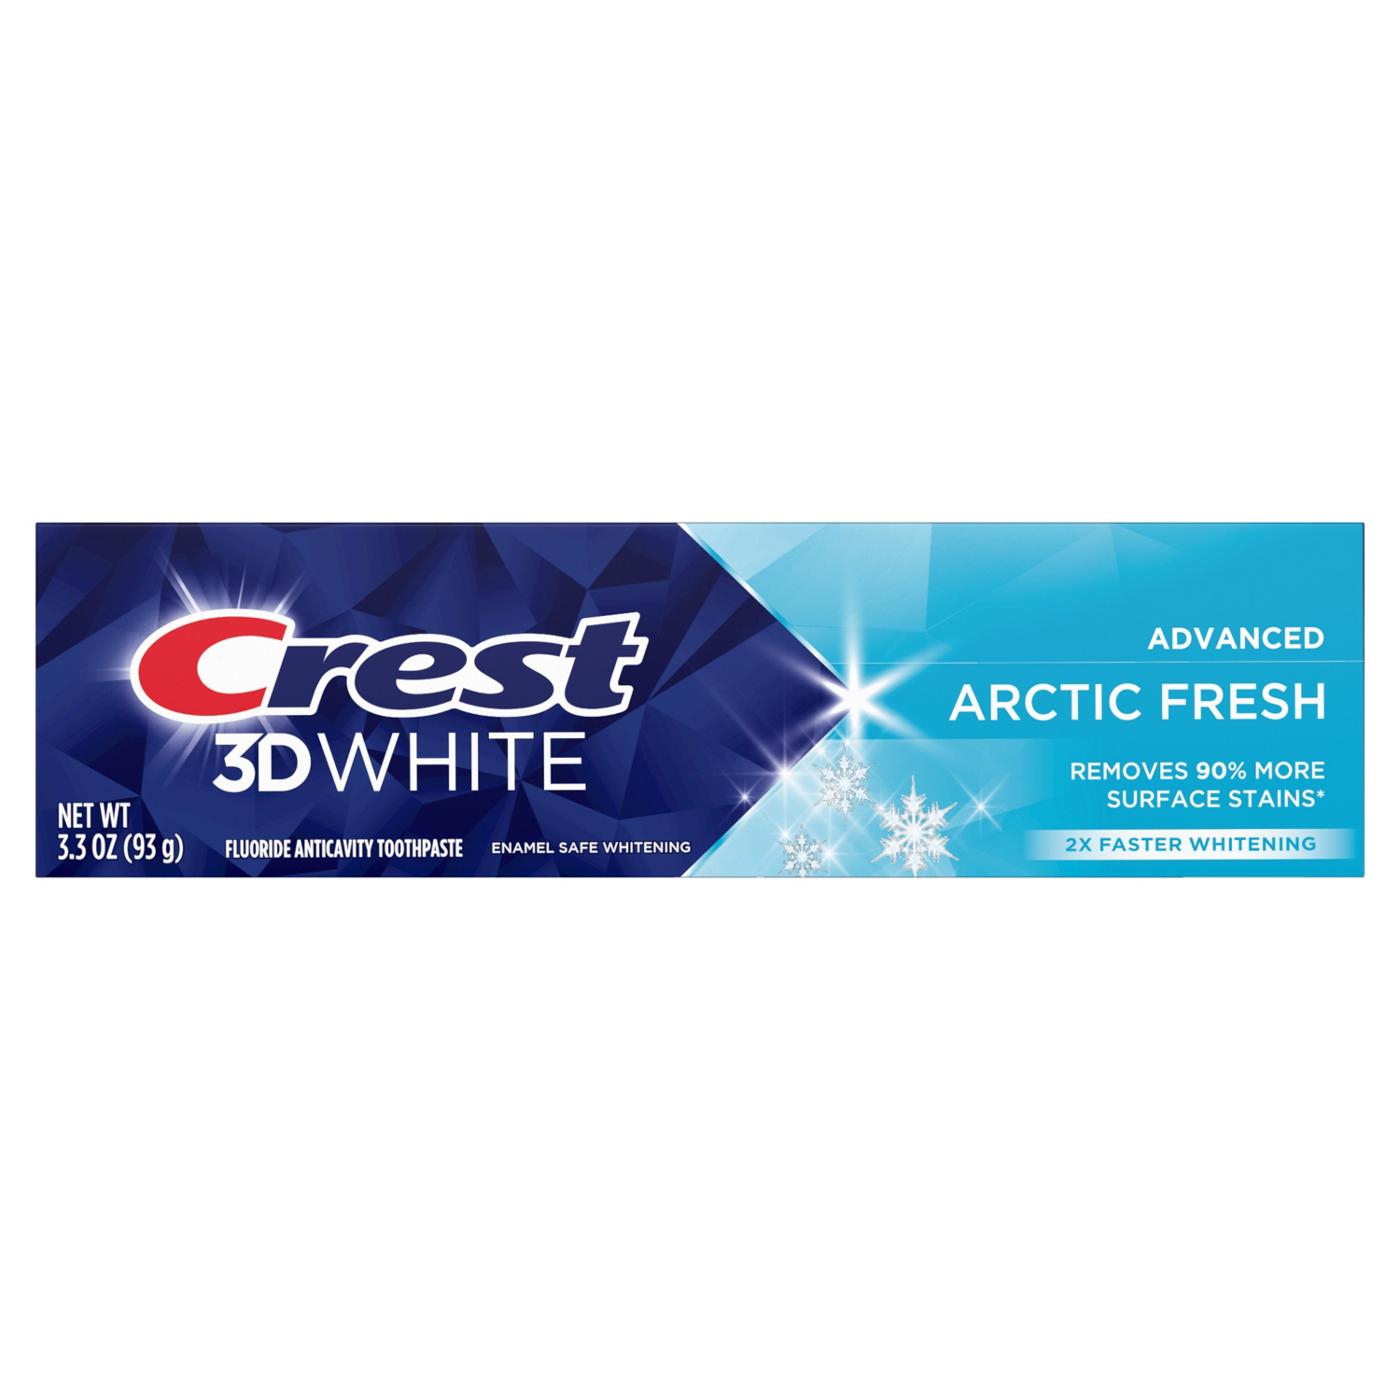 Crest 3D White Advanced Whitening Toothpaste - Arctic Fresh; image 1 of 8